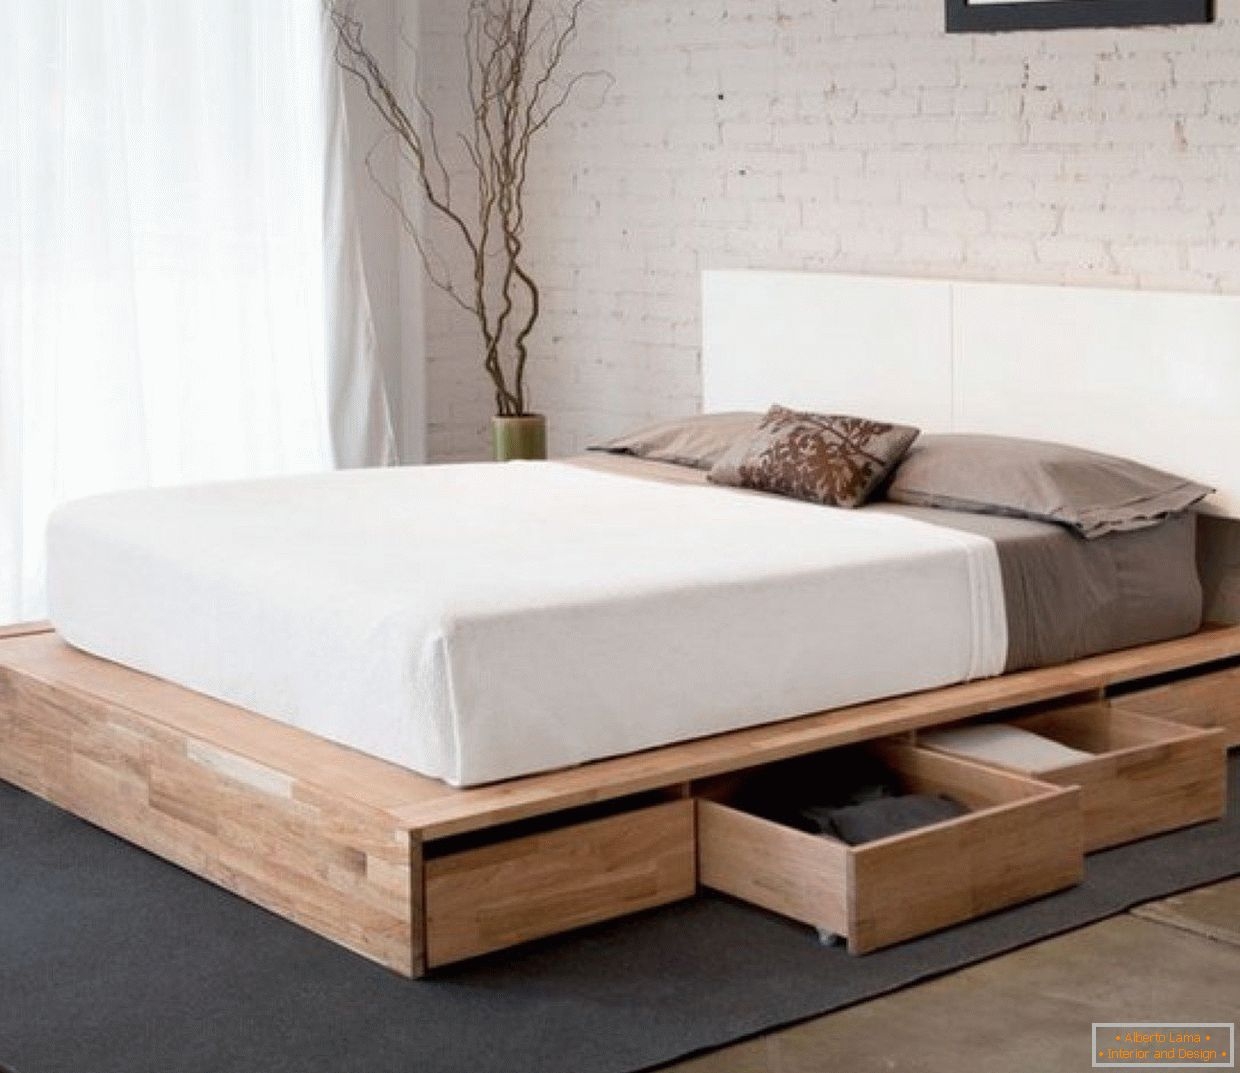 Bed With Drawers Underneath Visualhunt, Bed Frame With Bed Underneath